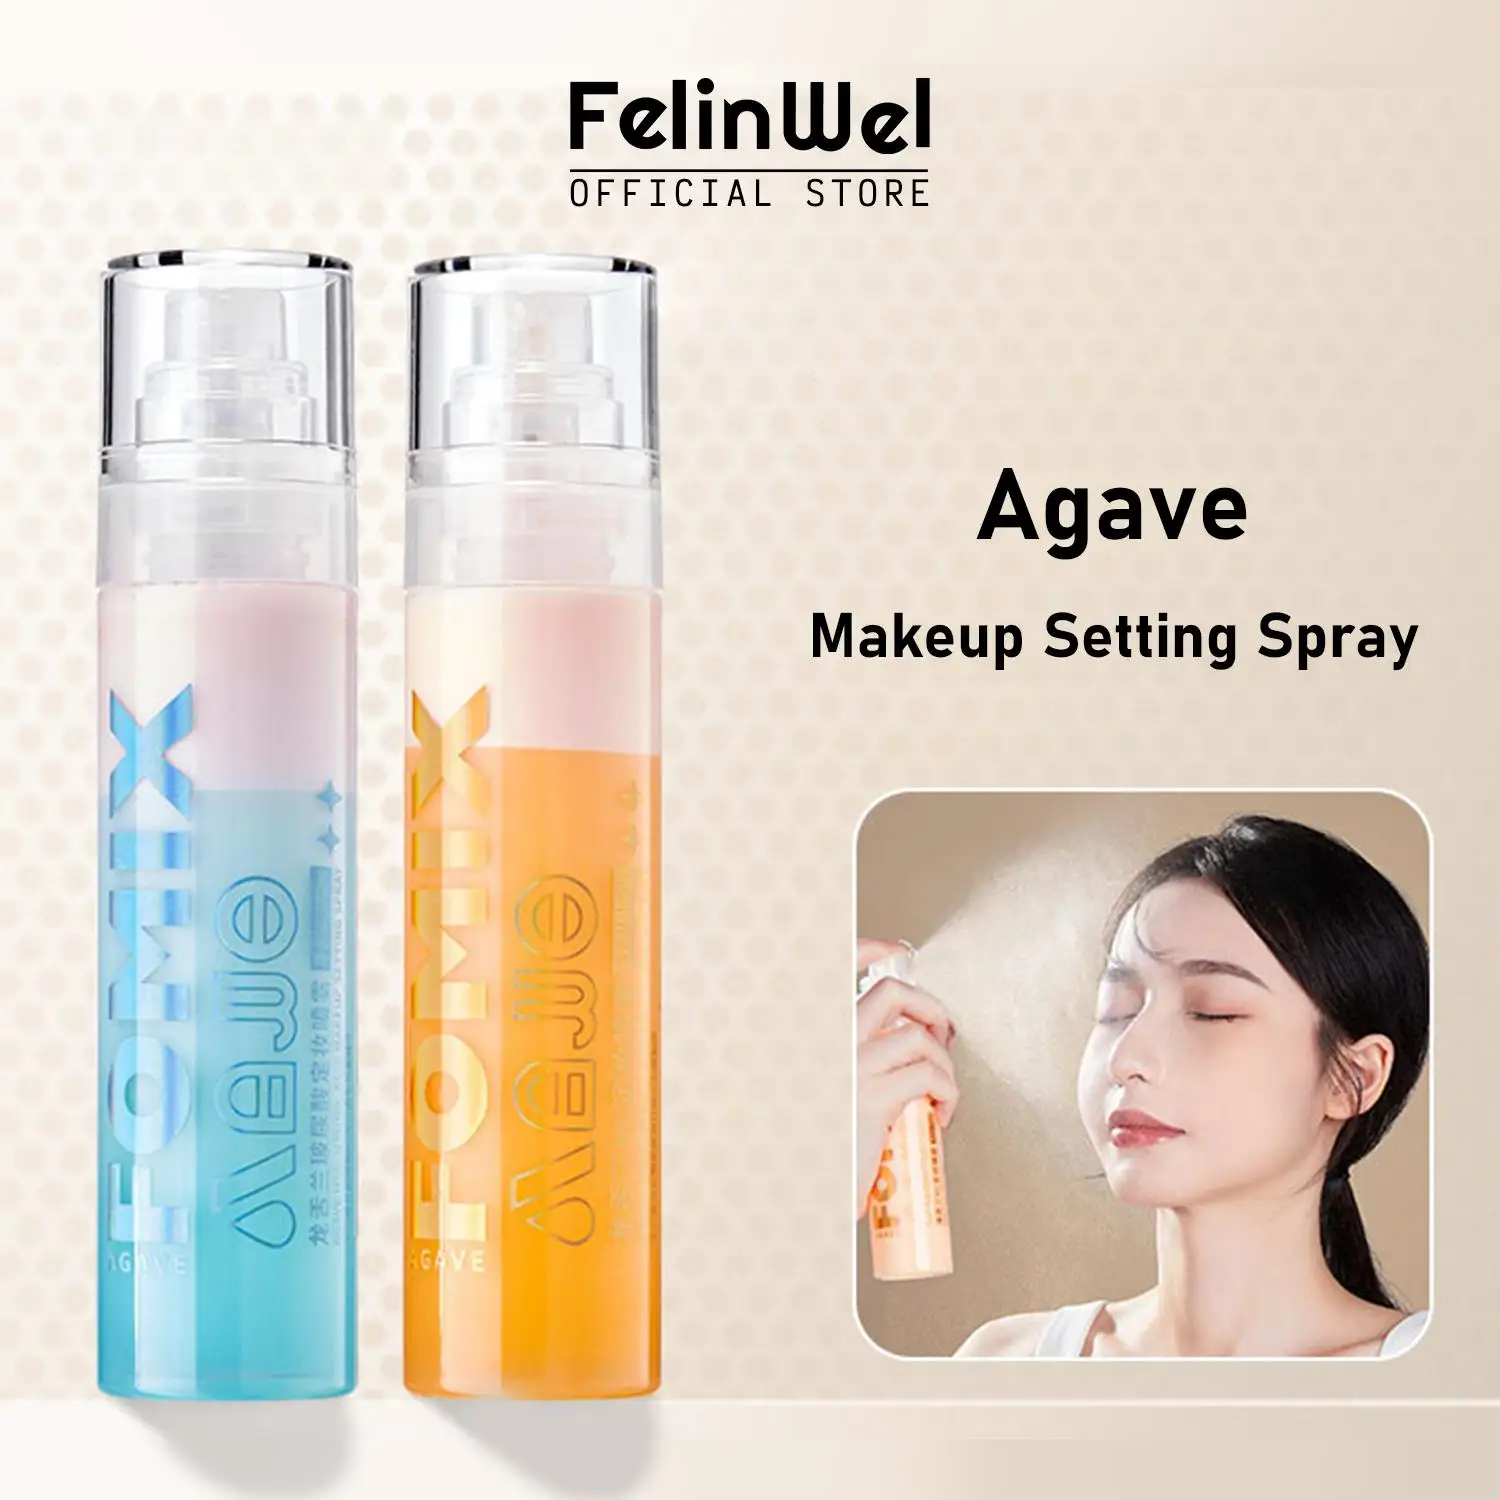 FelinWel - Facial Mist Makeup Setting Spray, Matte Finish Long Lasting A Must for Your Natural Anti Aging Skincare Routine